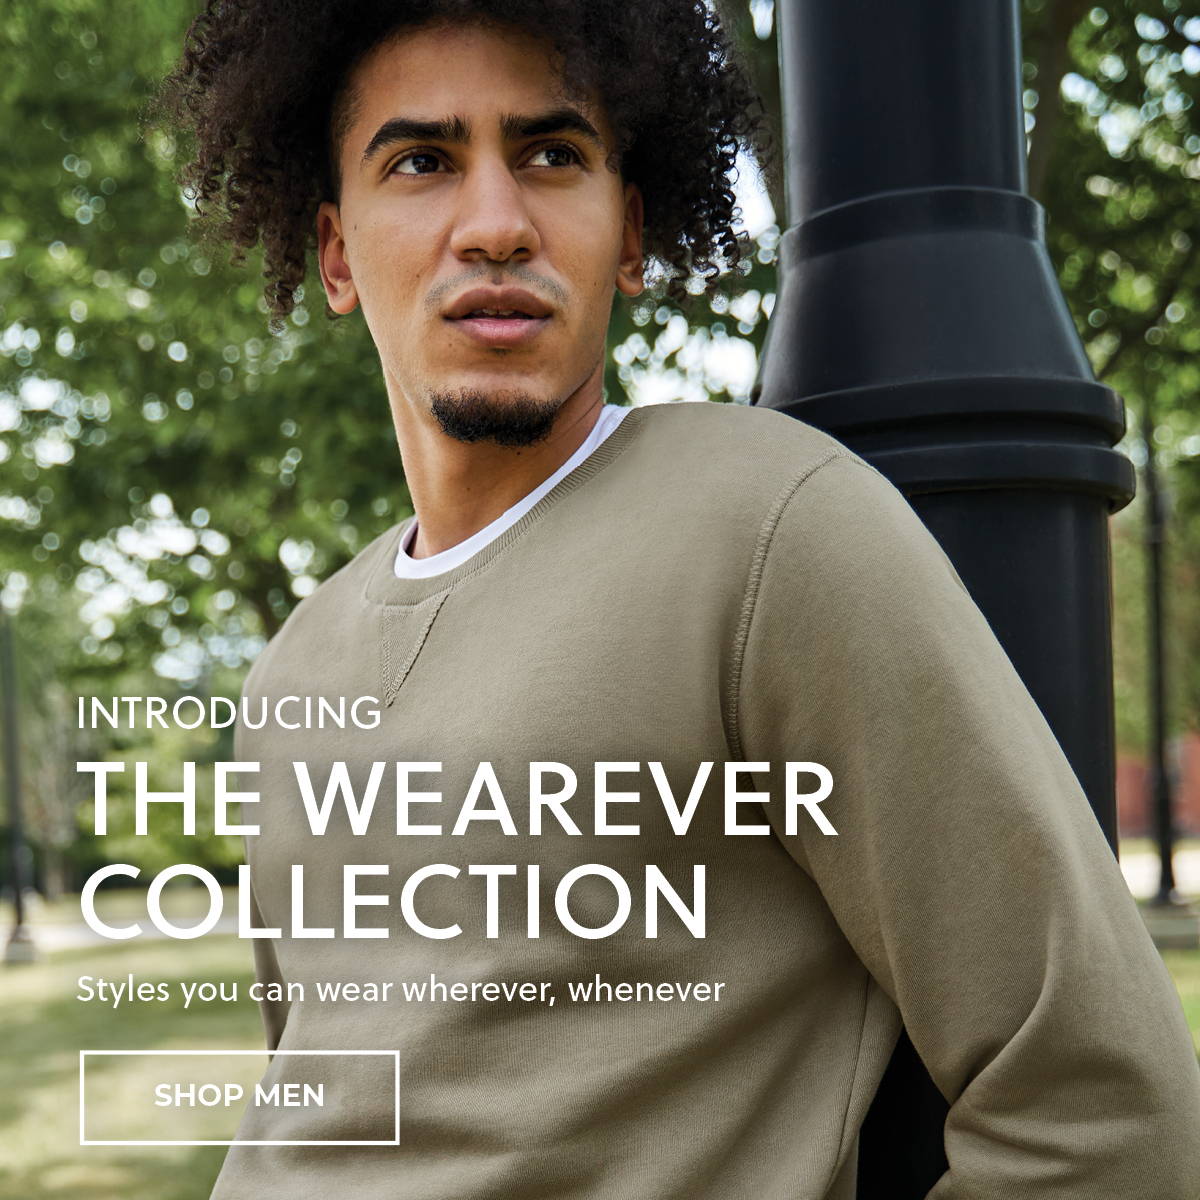 Introducing the Wearever Collection. Styles you can wear wherever, whenever by American Tall.